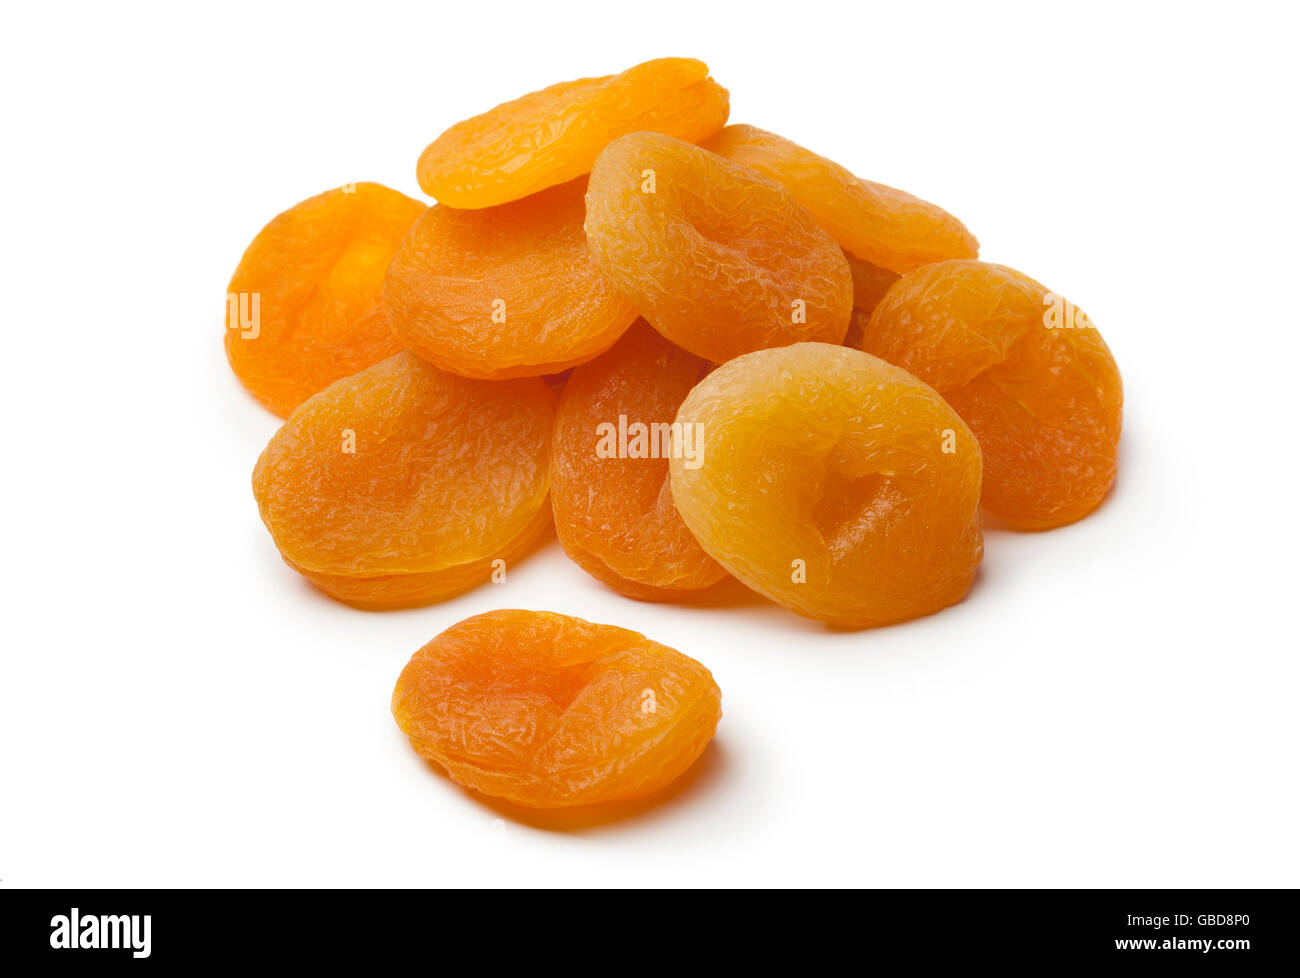 Heap of healthy dried apricot fruit on white background Stock Photo